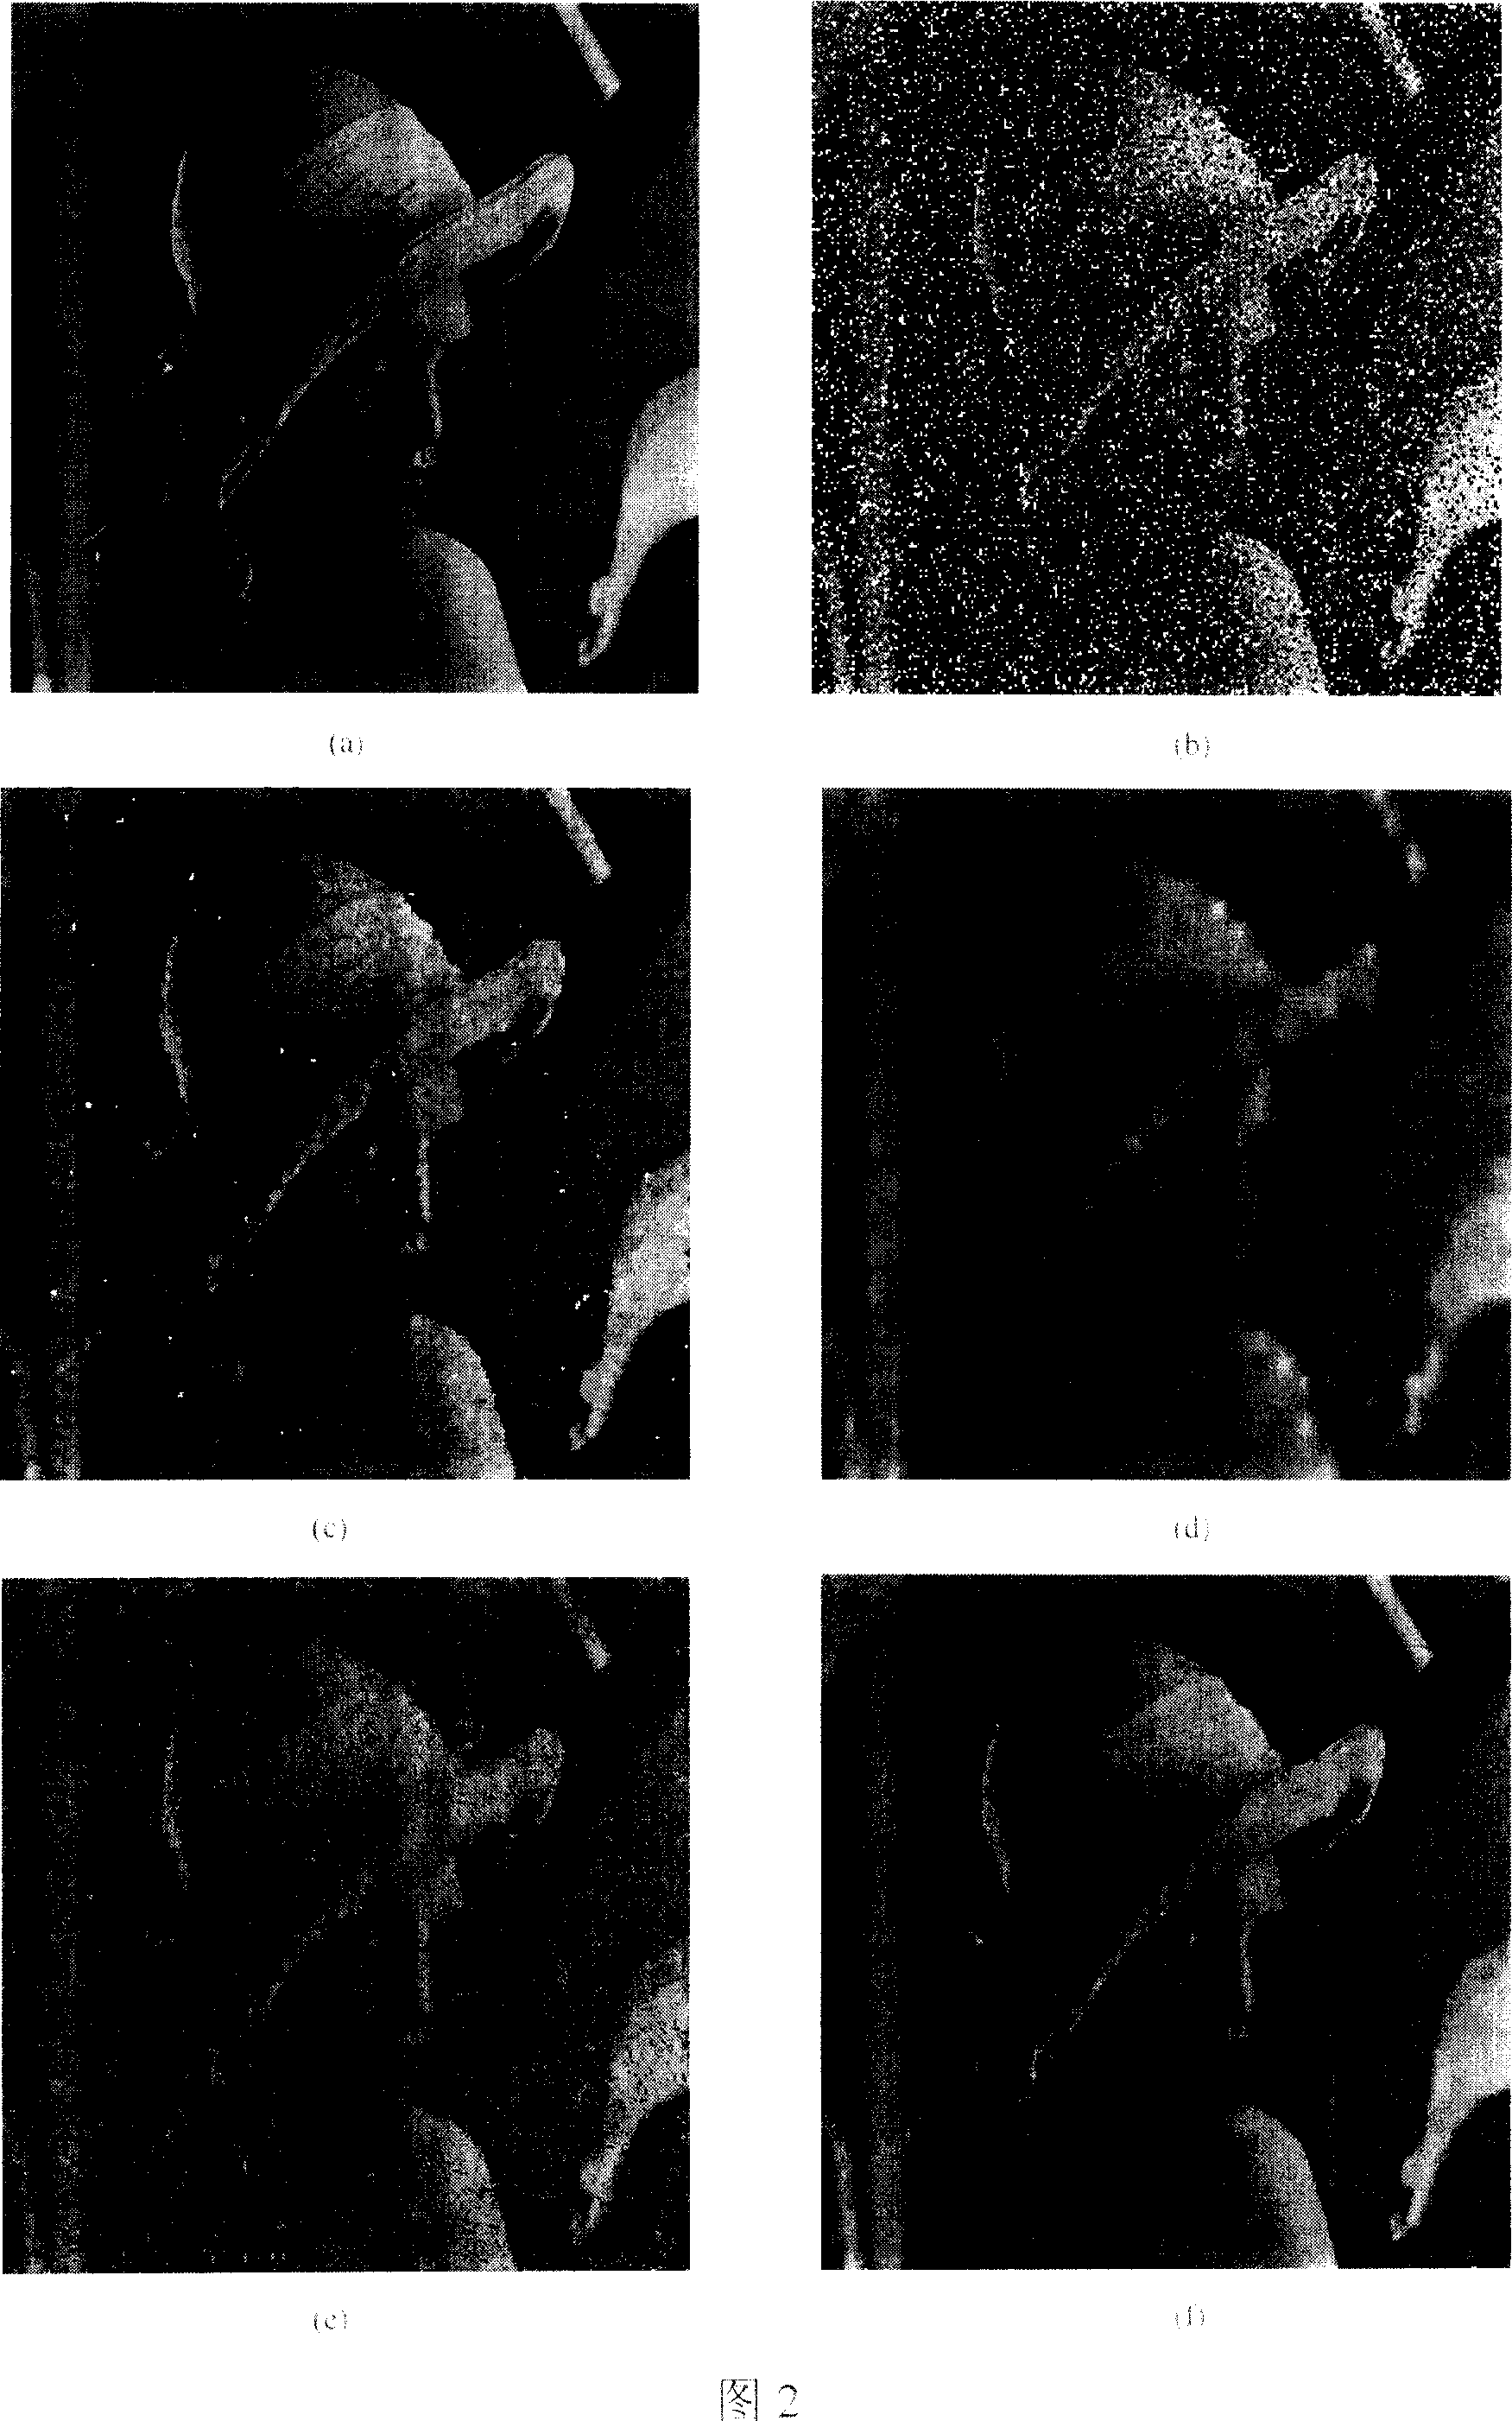 Self-adapting method for filtering image with edge being retained